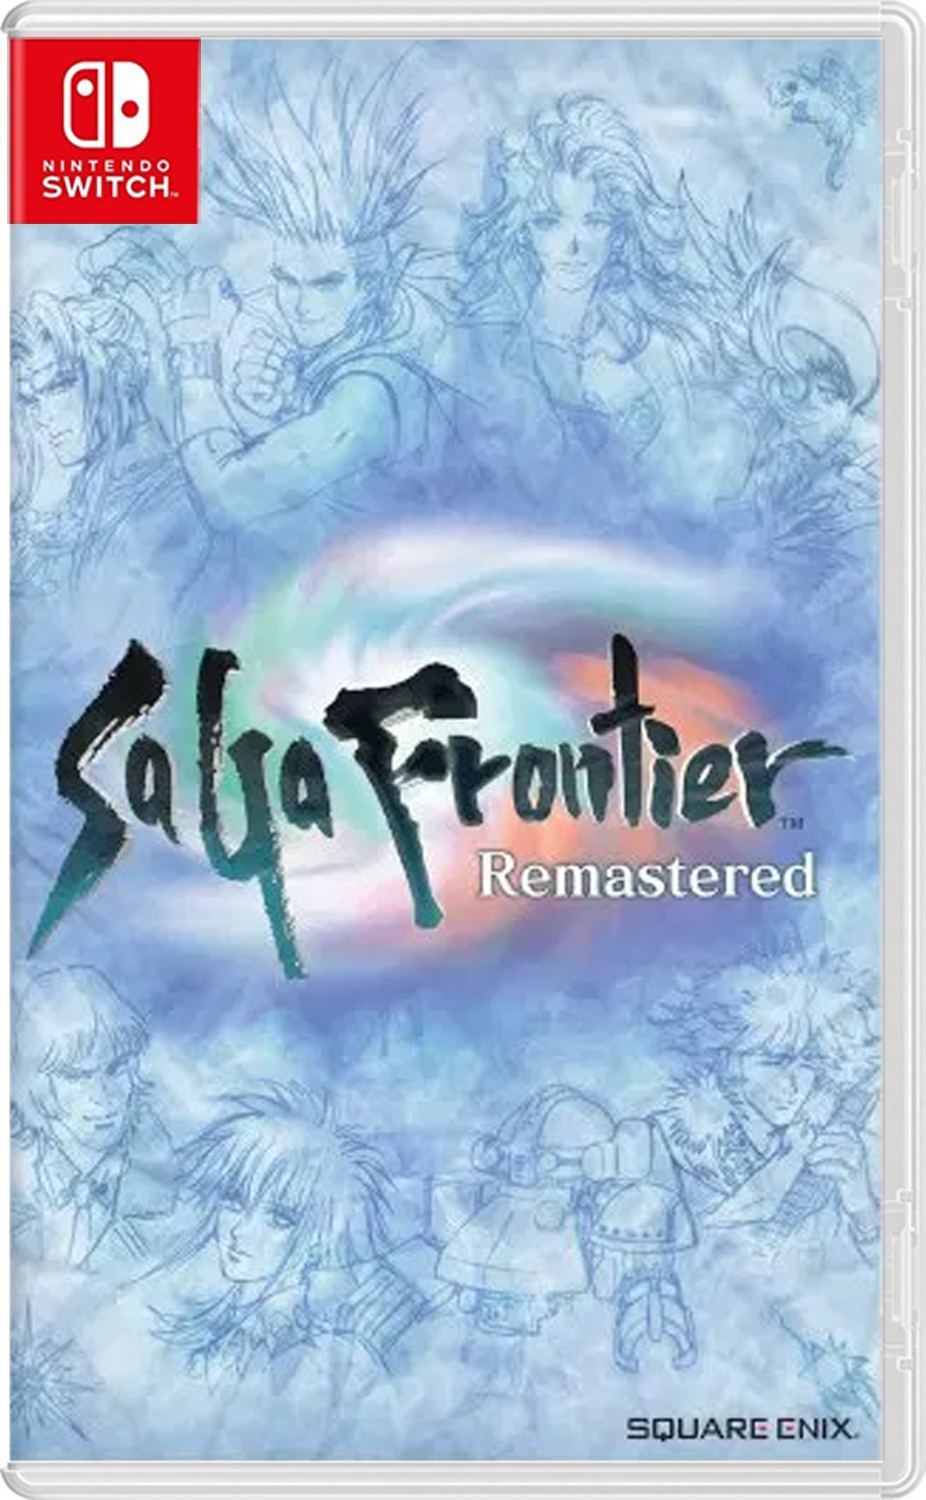 SaGa Frontier Remastered (English) for Nintendo Switch